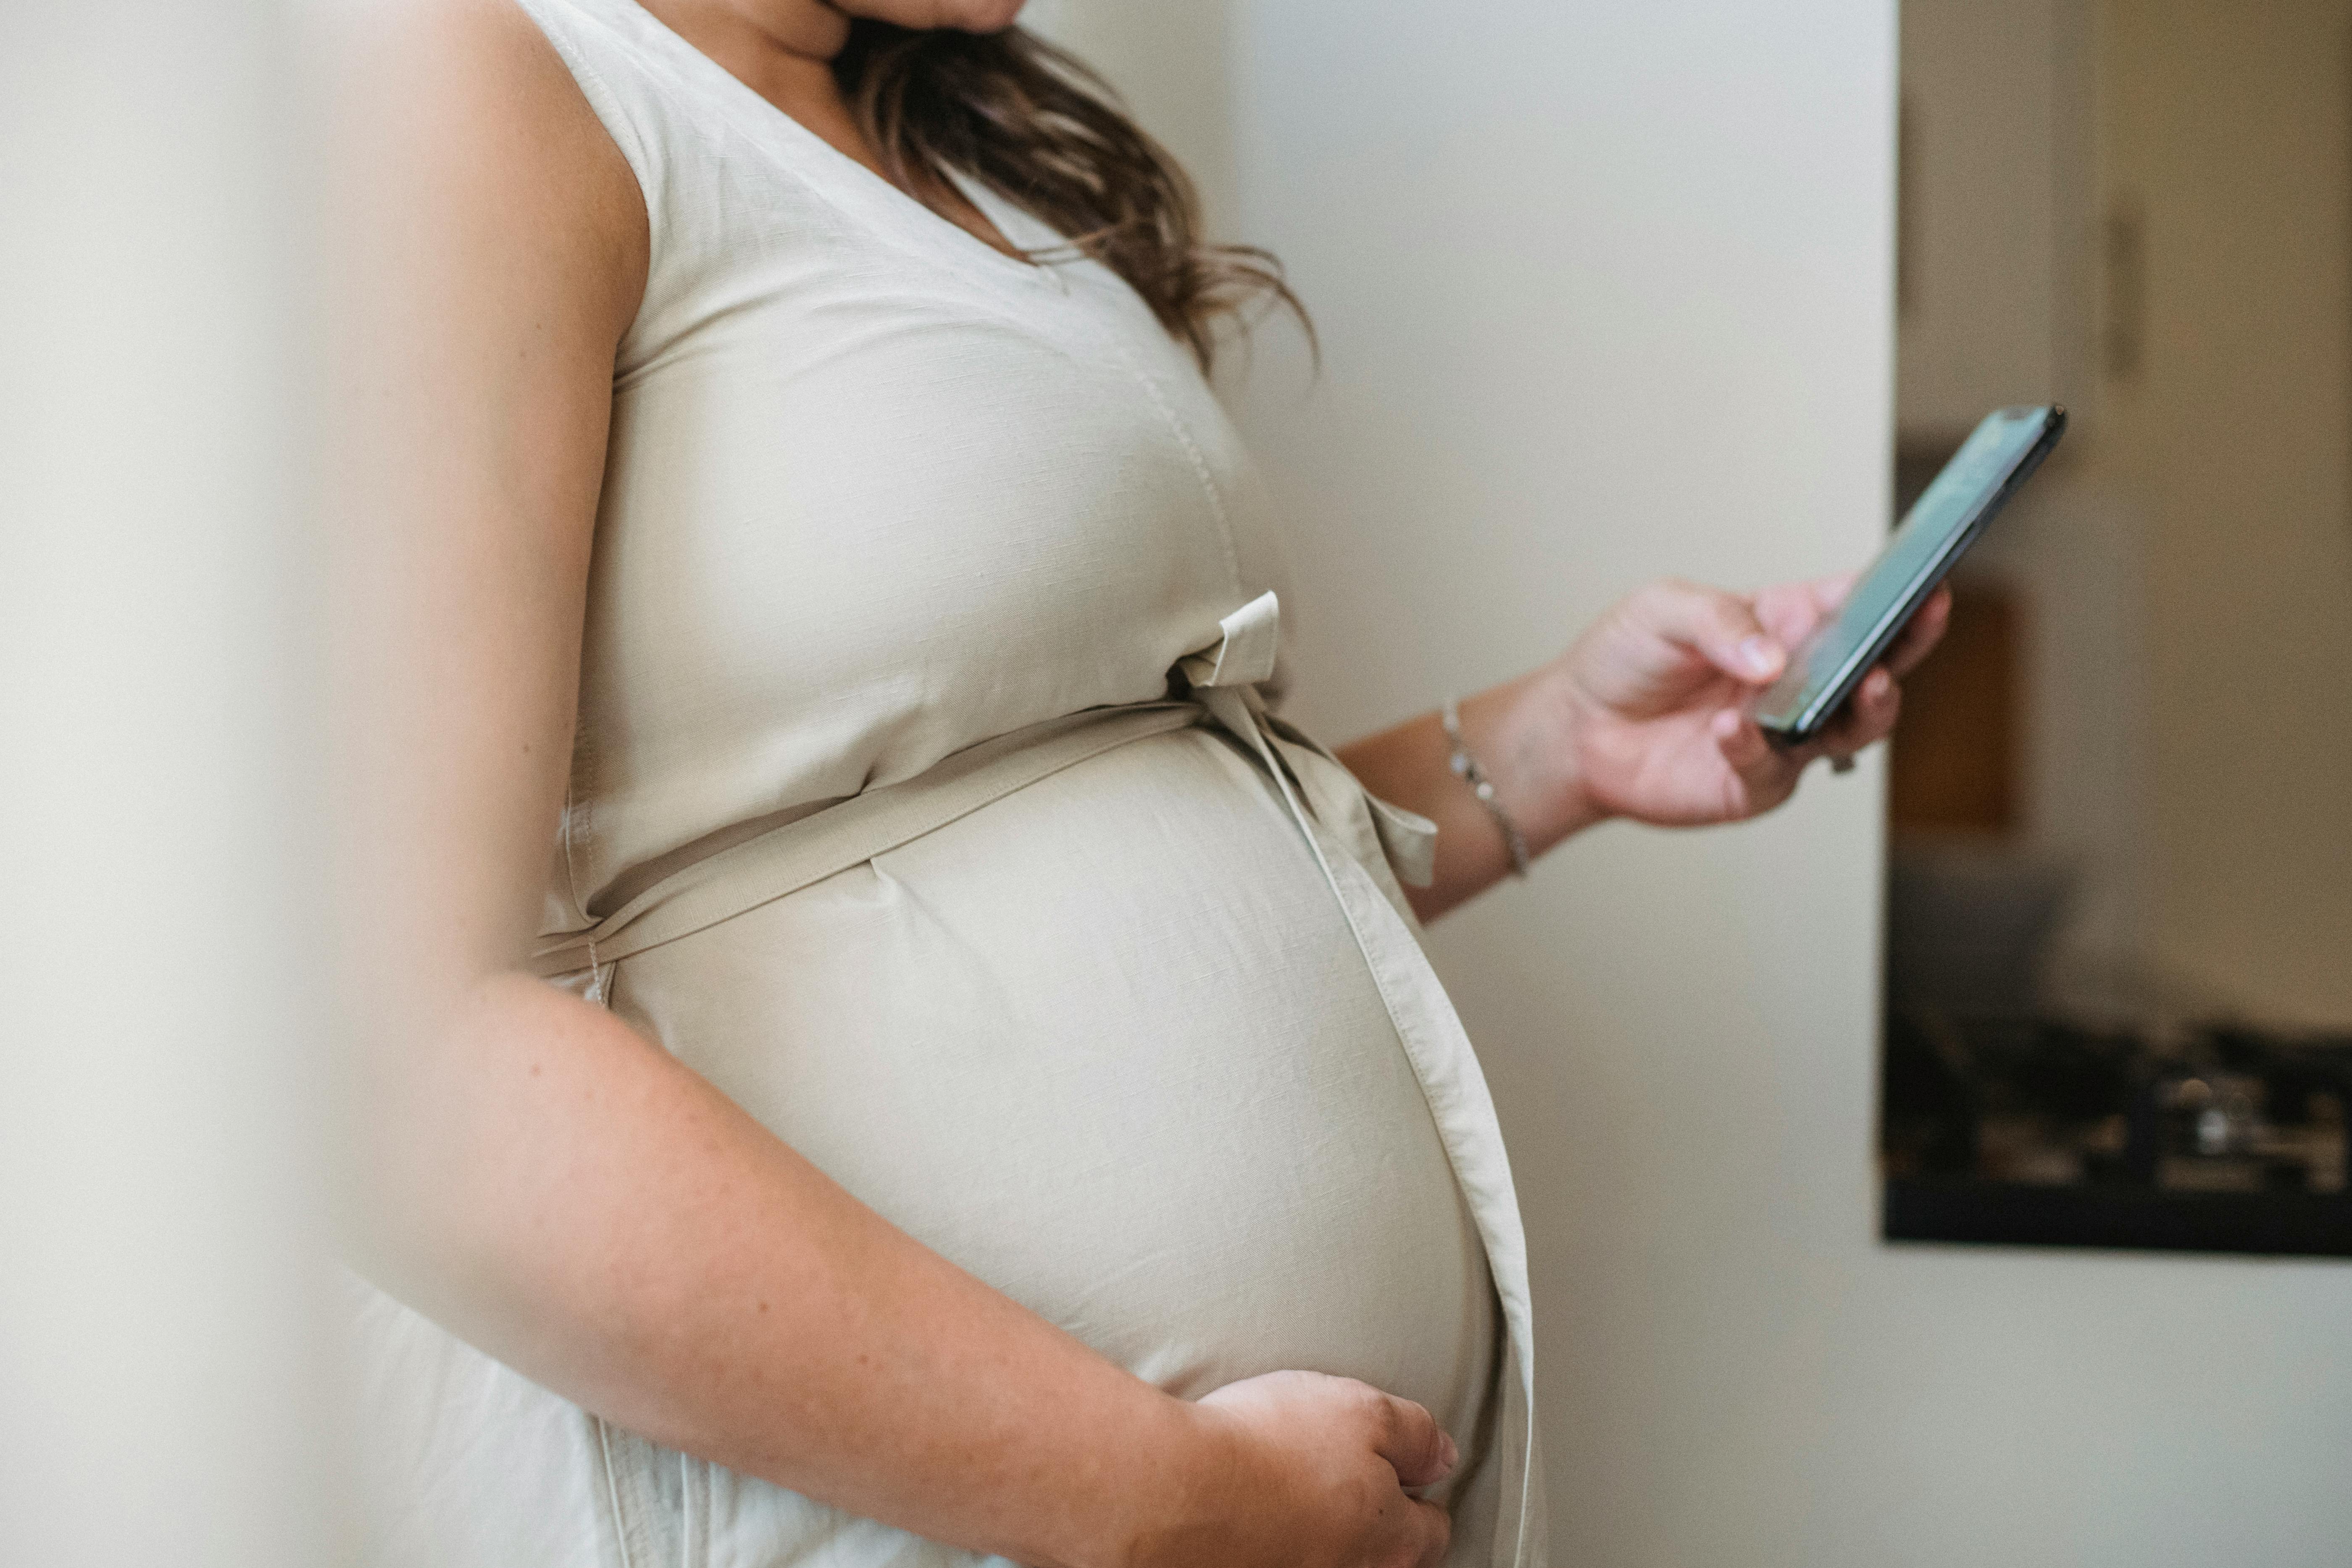 A pregnant woman using her phone | Source: Amina Filkins on Pexels